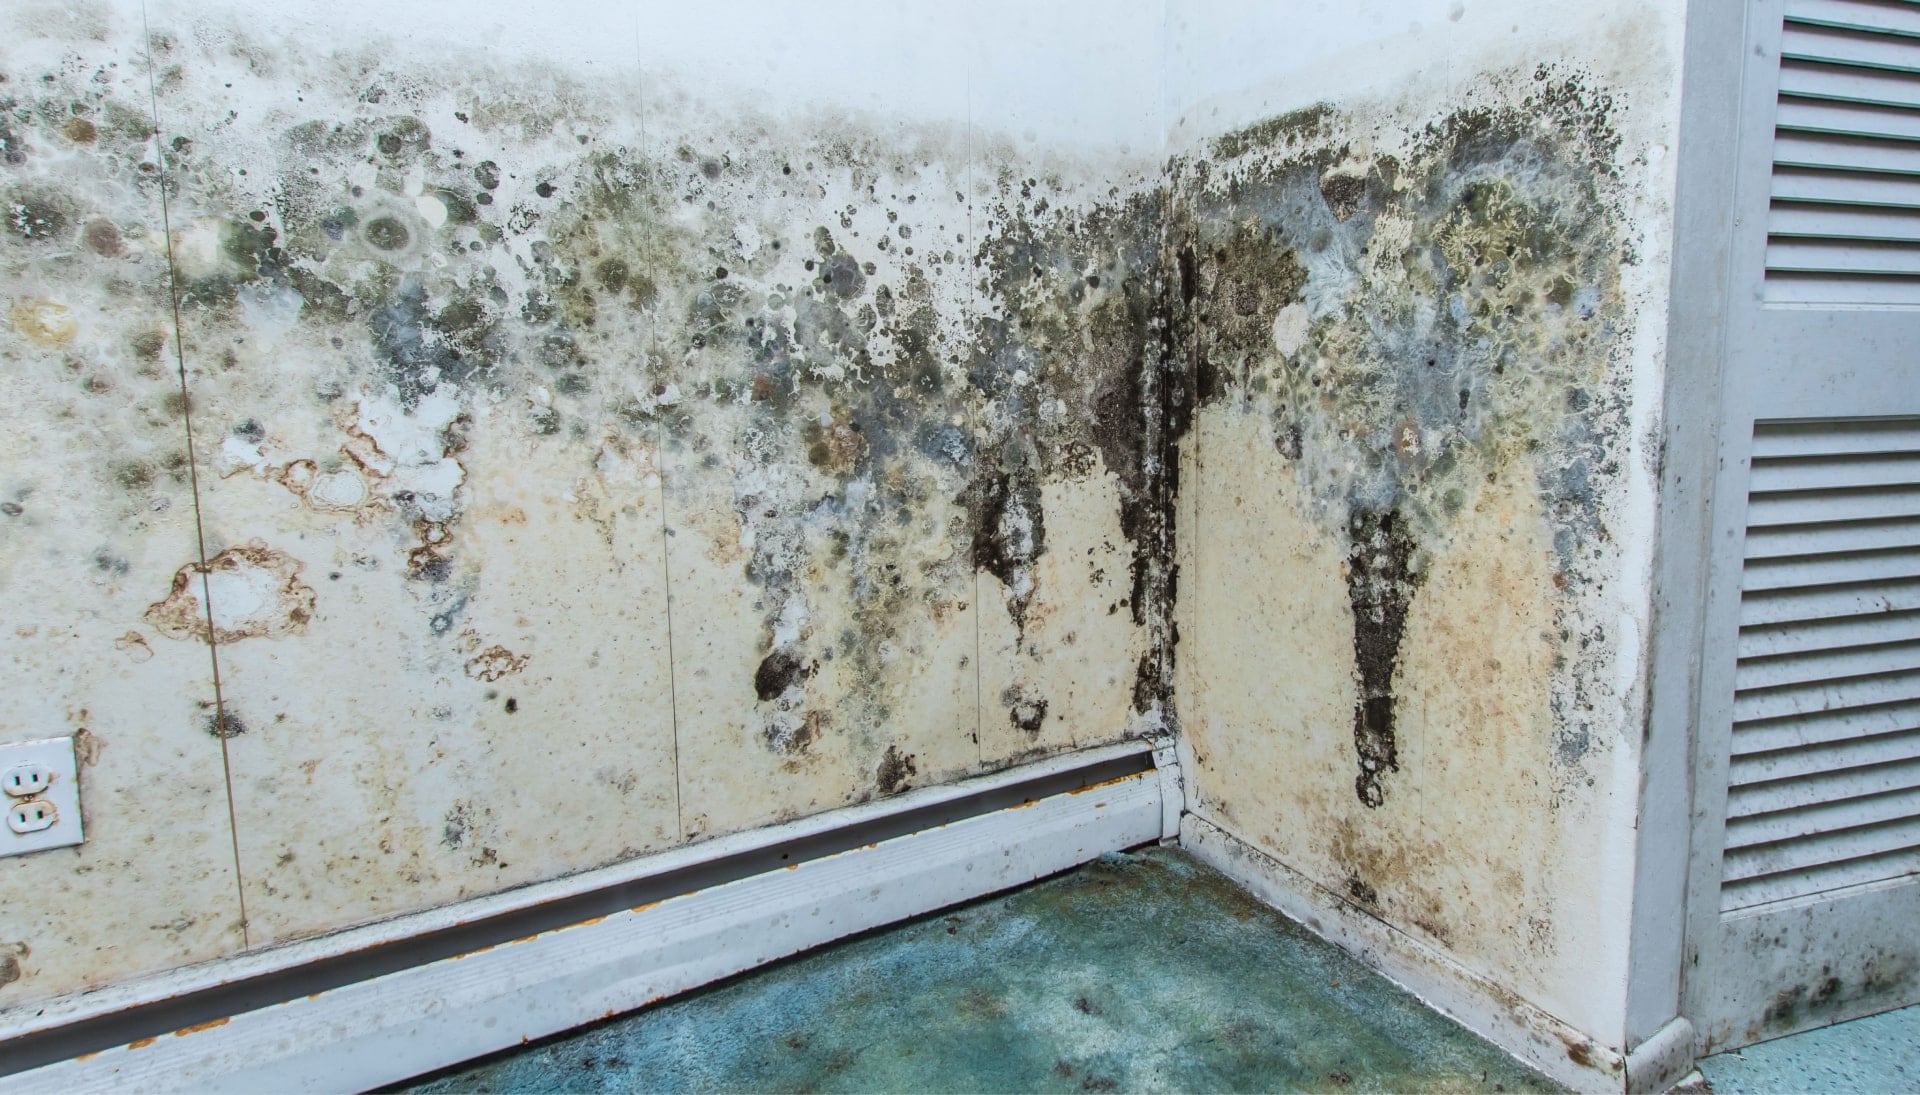 A mold remediation team using specialized techniques to remove mold damage and control odors in a Pembroke Pines property, with a focus on safety and efficiency